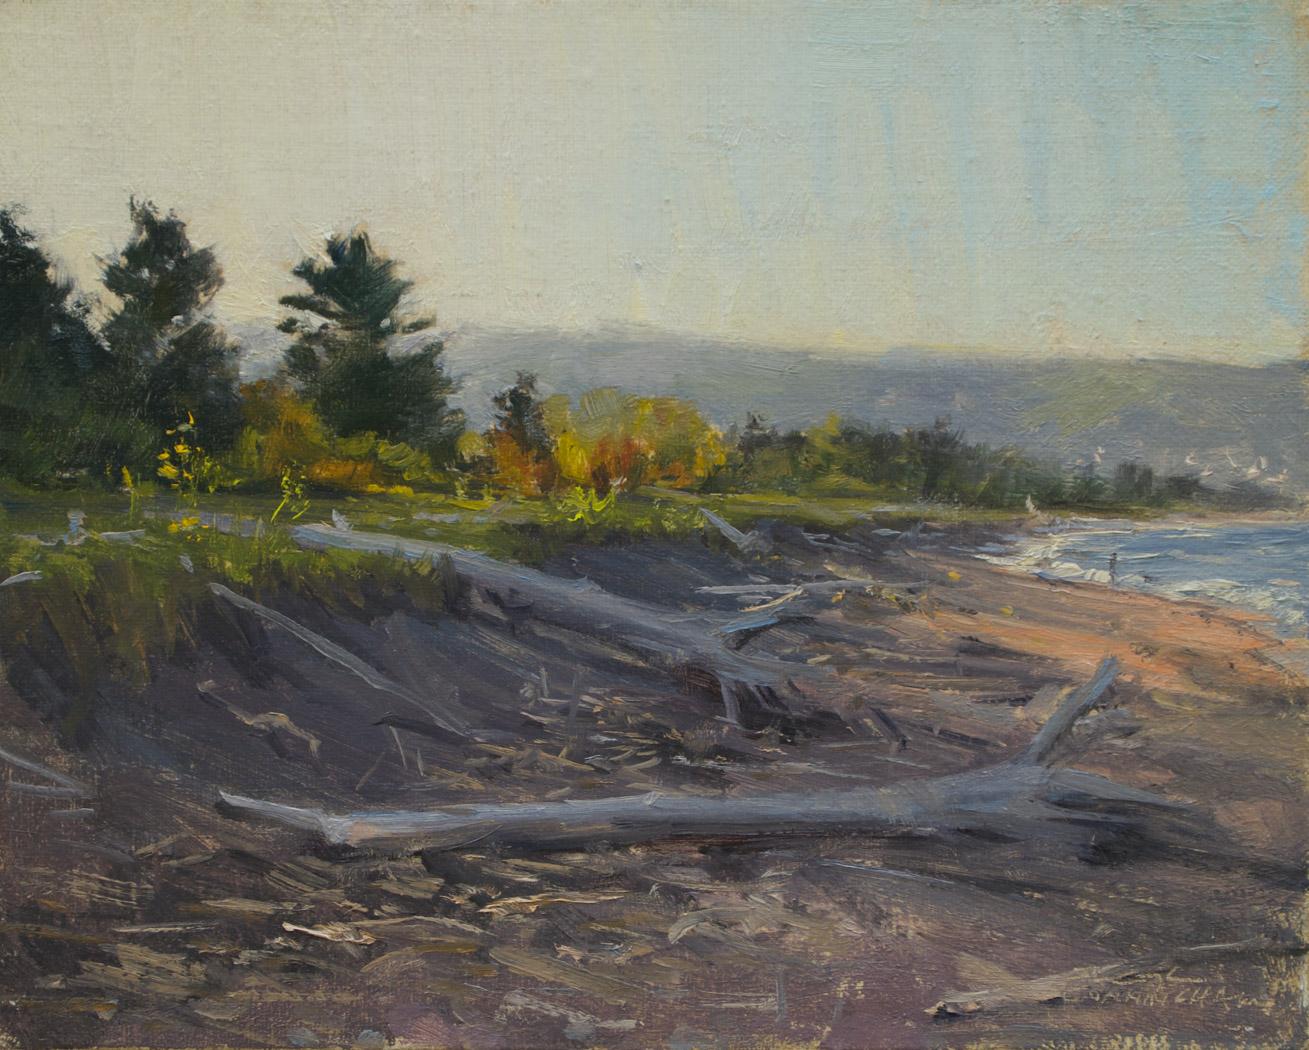 A painting of broken branches near the beach